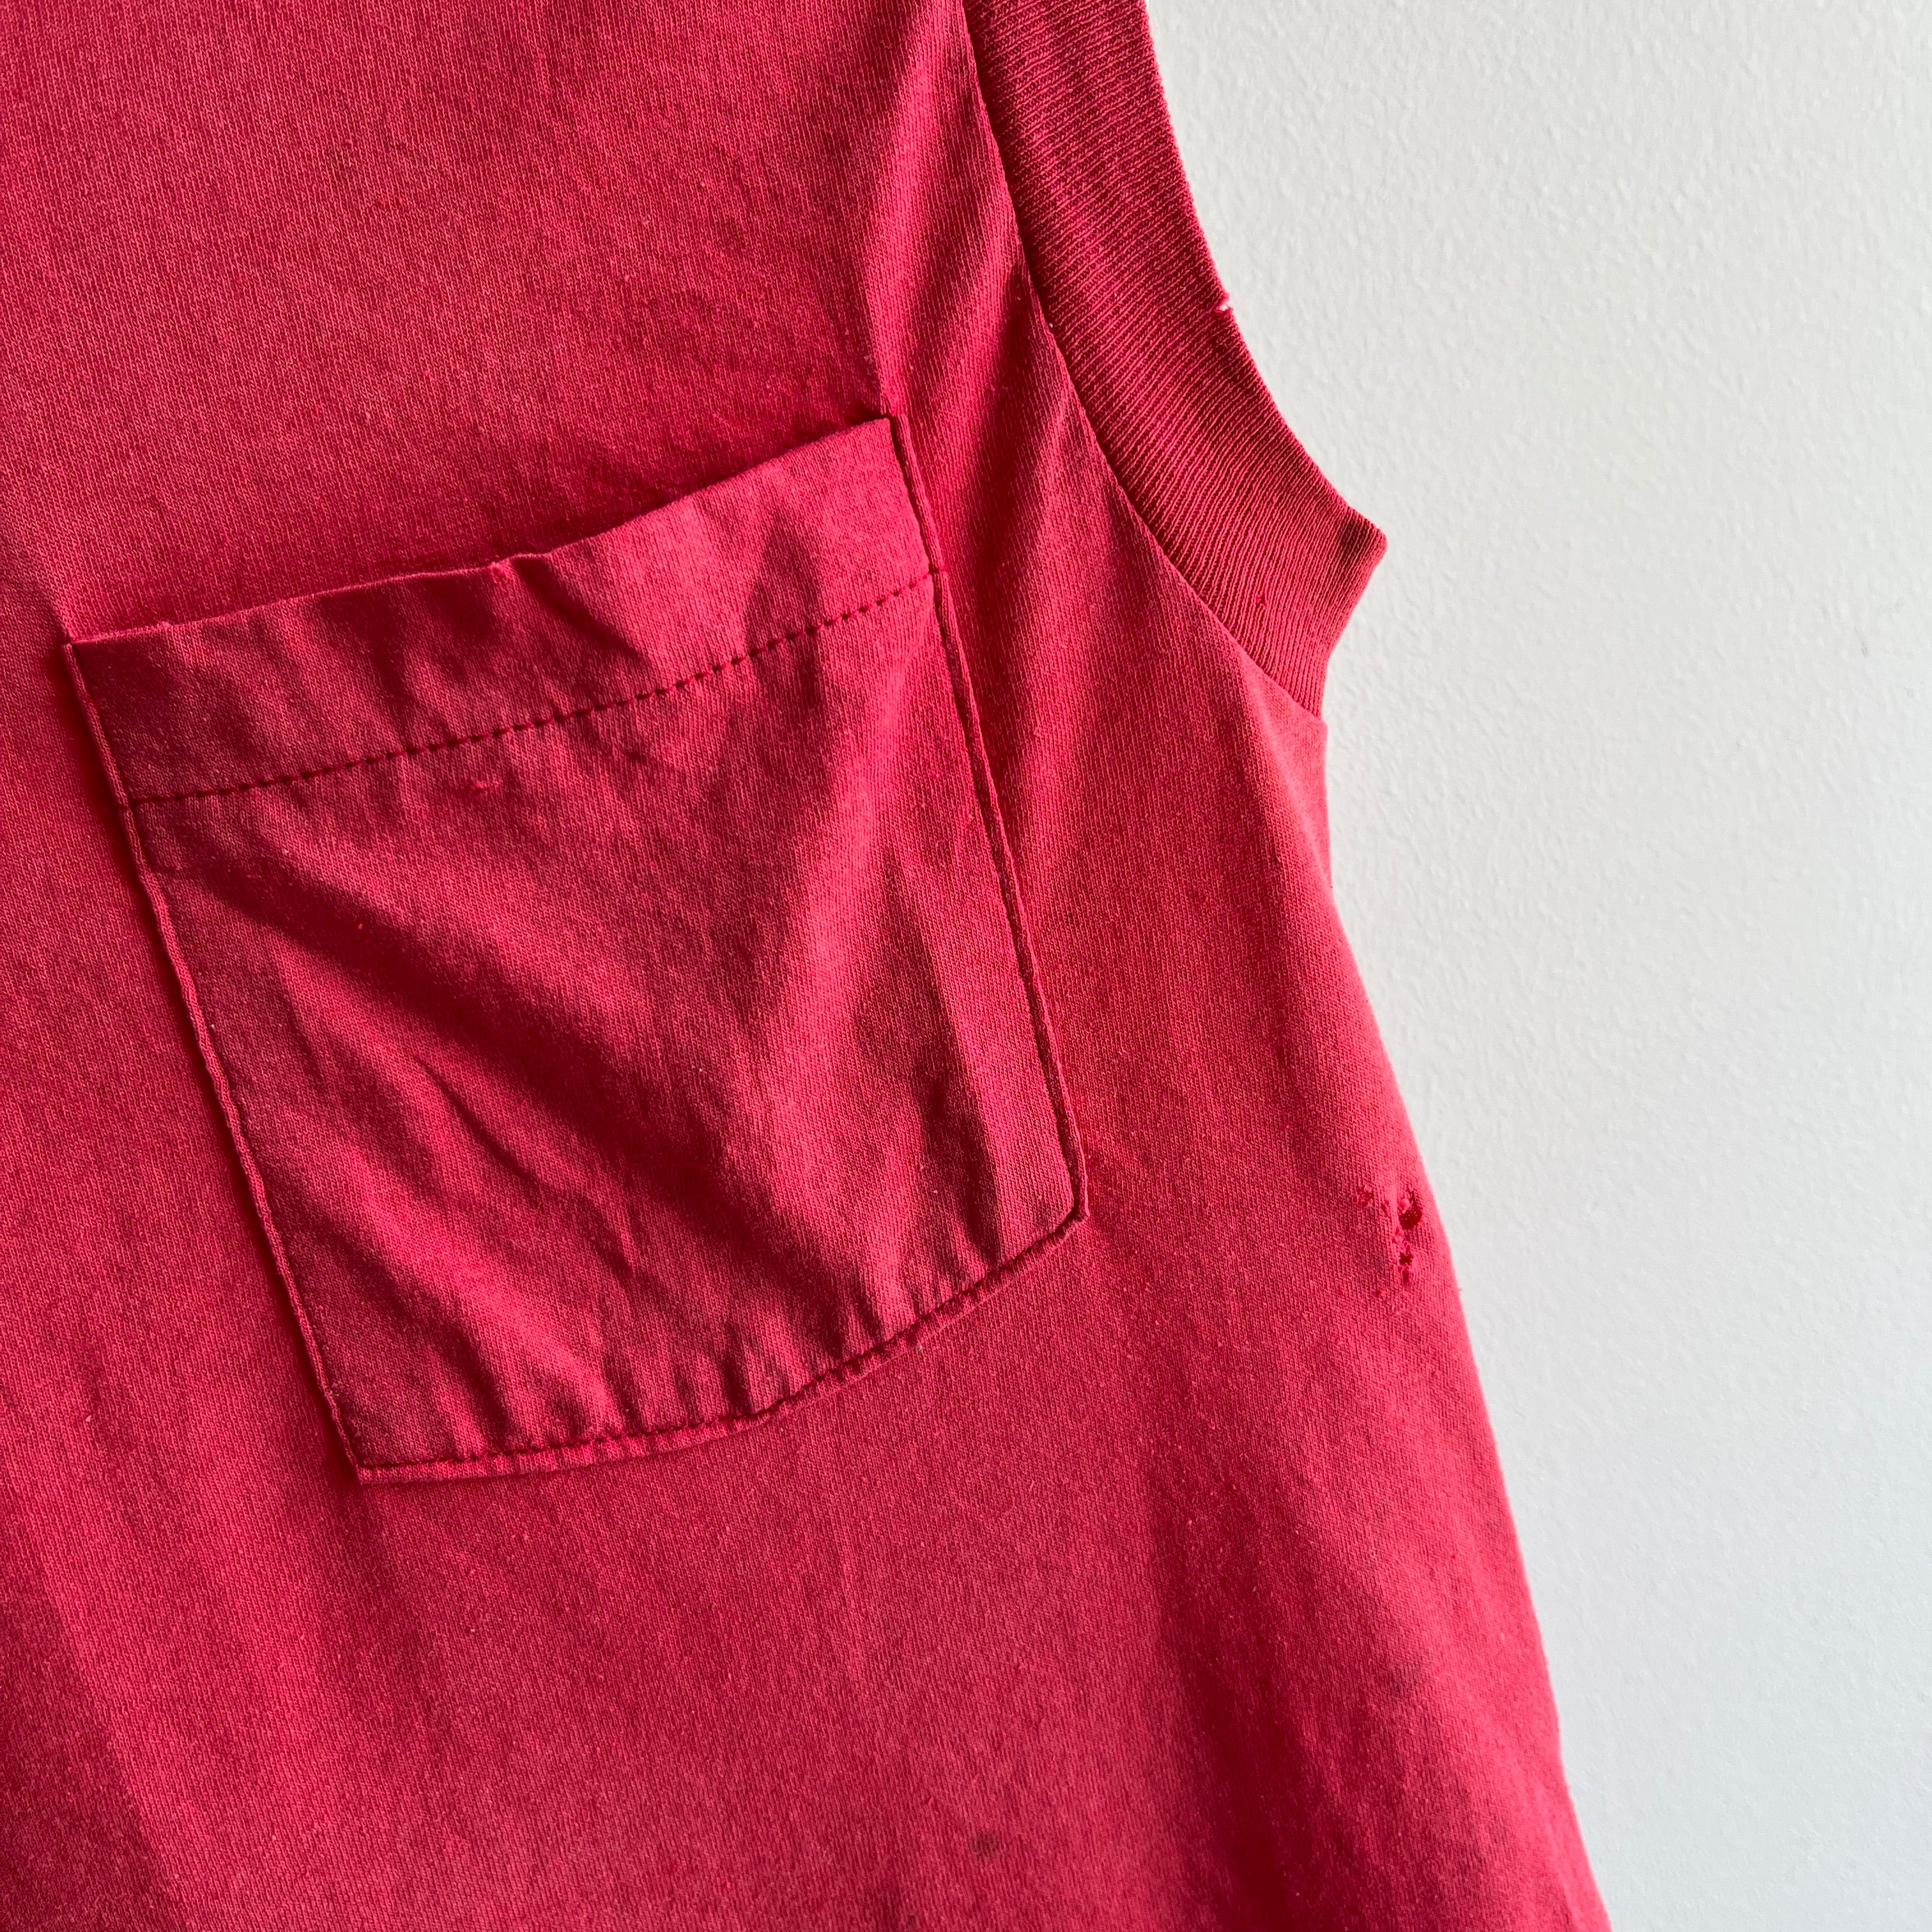 1980s Super Sun Faded Tattered, Torn and Worn Muscle Pocket Tank